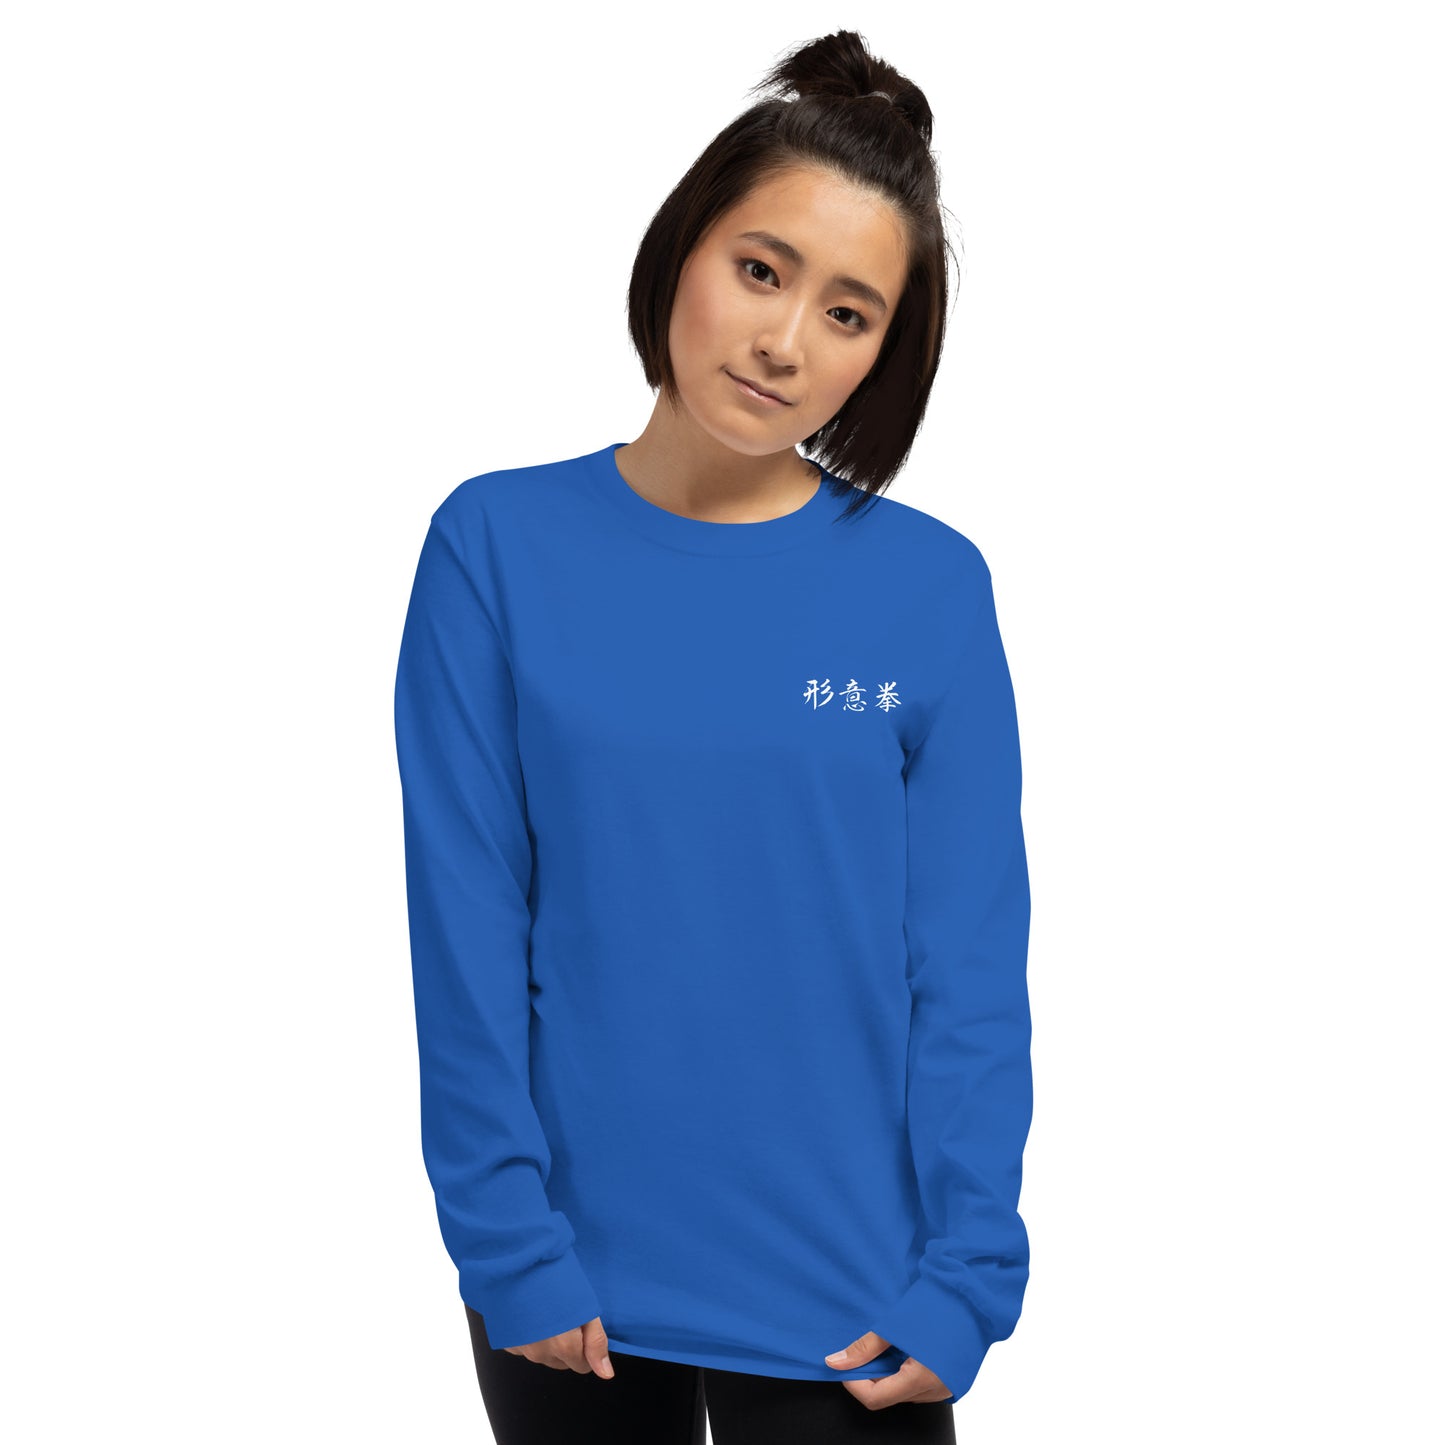 Hsing I Chuan tee - Long sleeve (front only)